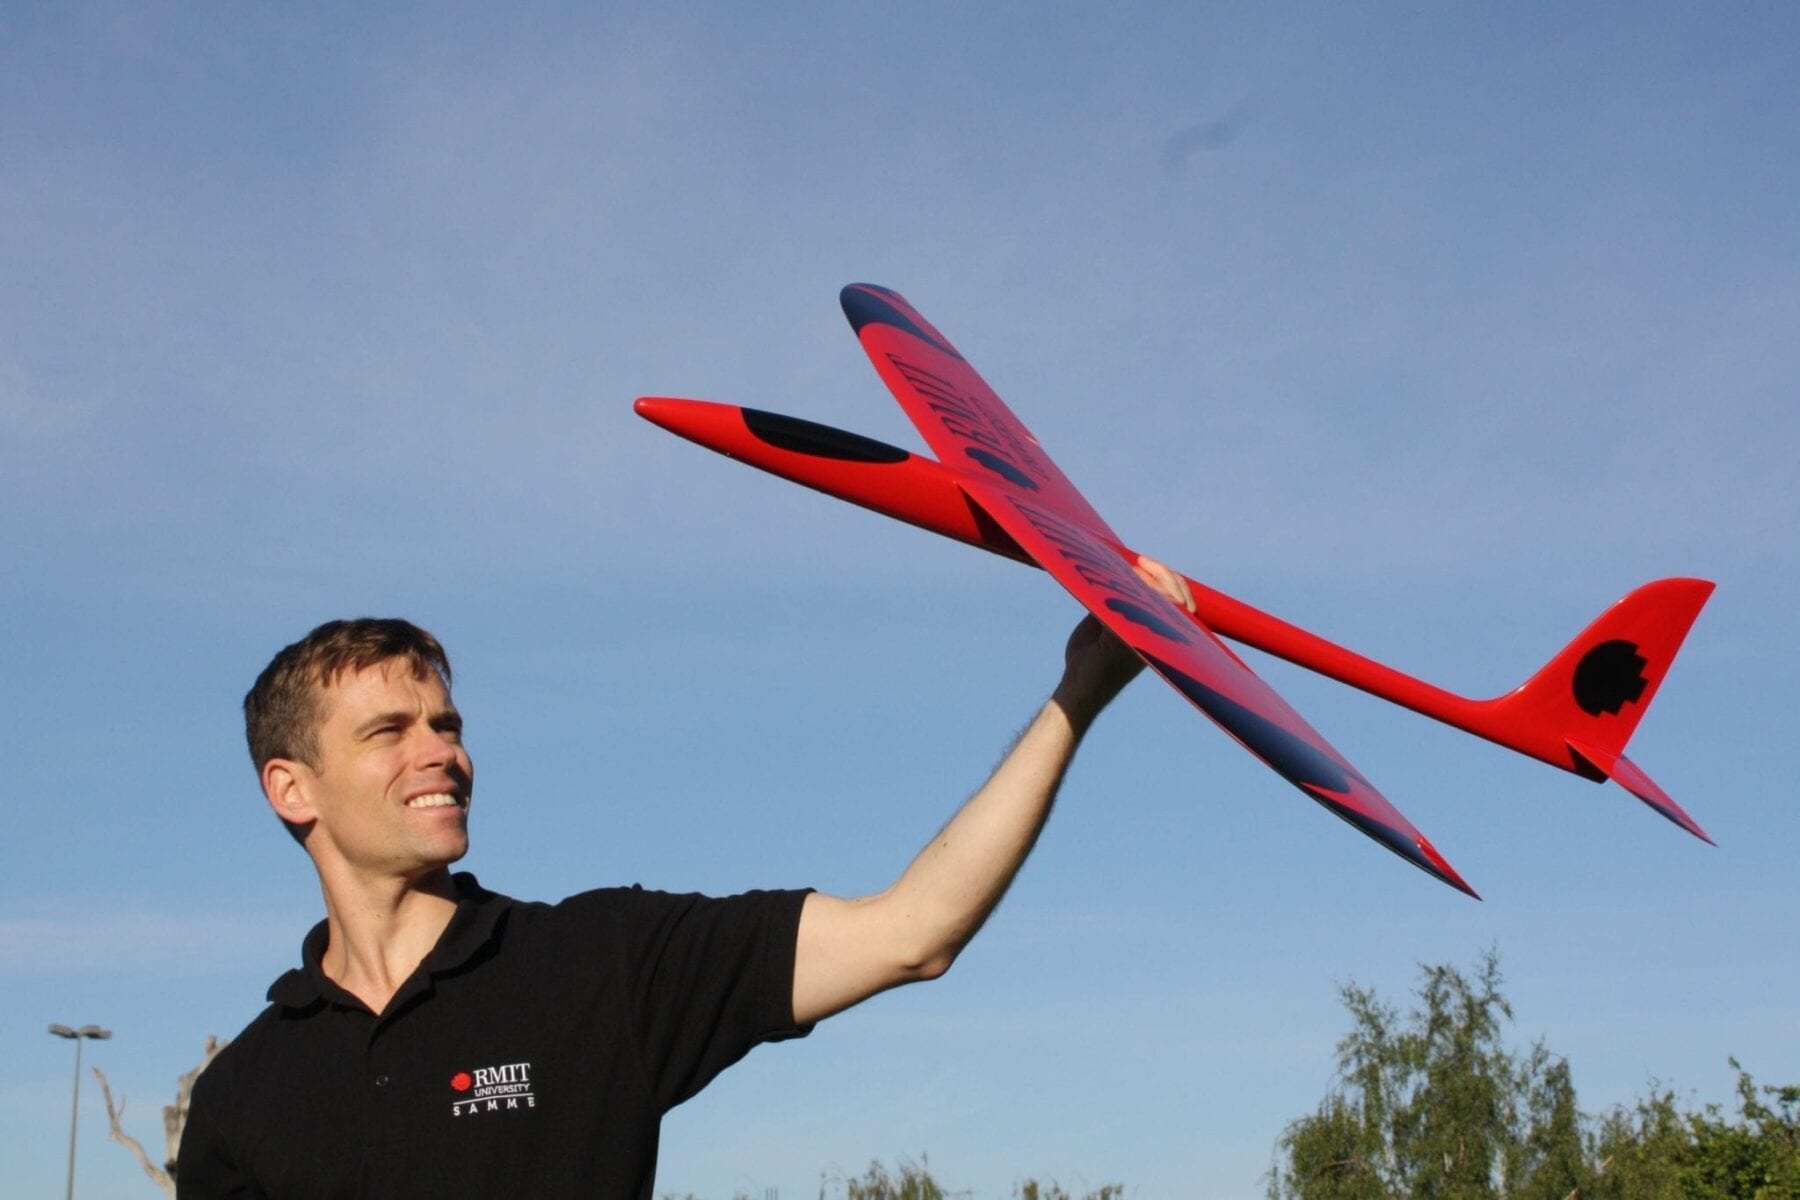 Bio-inspired unmanned aircraft capable of soaring like birds